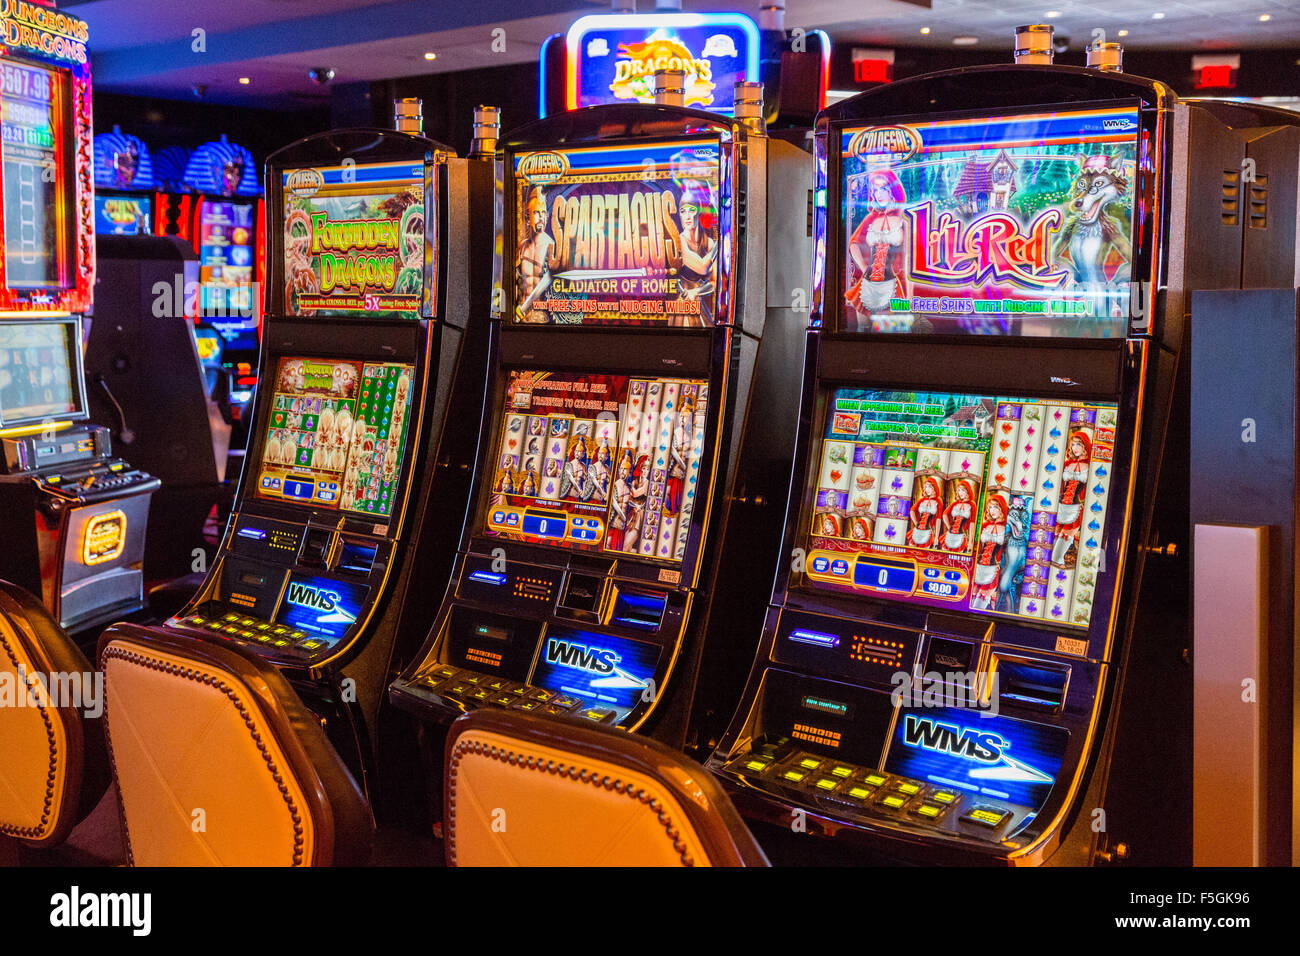 Used Slot Machines For Sale In Las Vegas